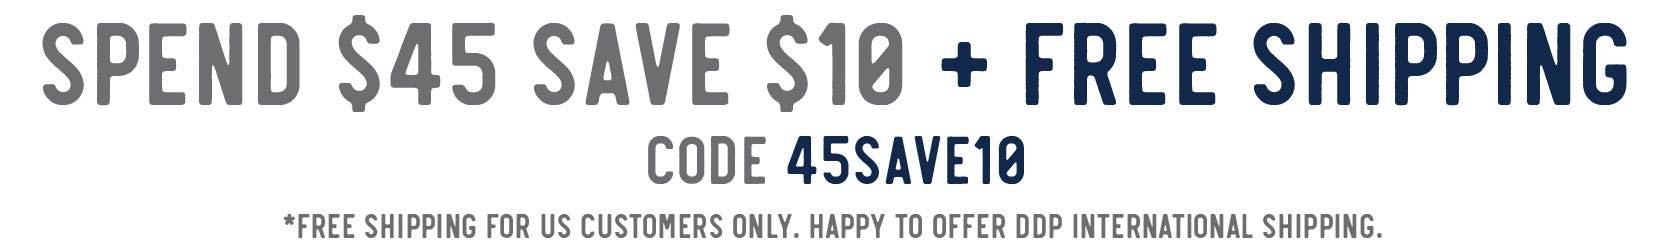 Spend $45- save $10 + free shipping. Use code 45SAVE10 at checkout. *free shipping for US customers only. Happy to offer DDP international shipping. 